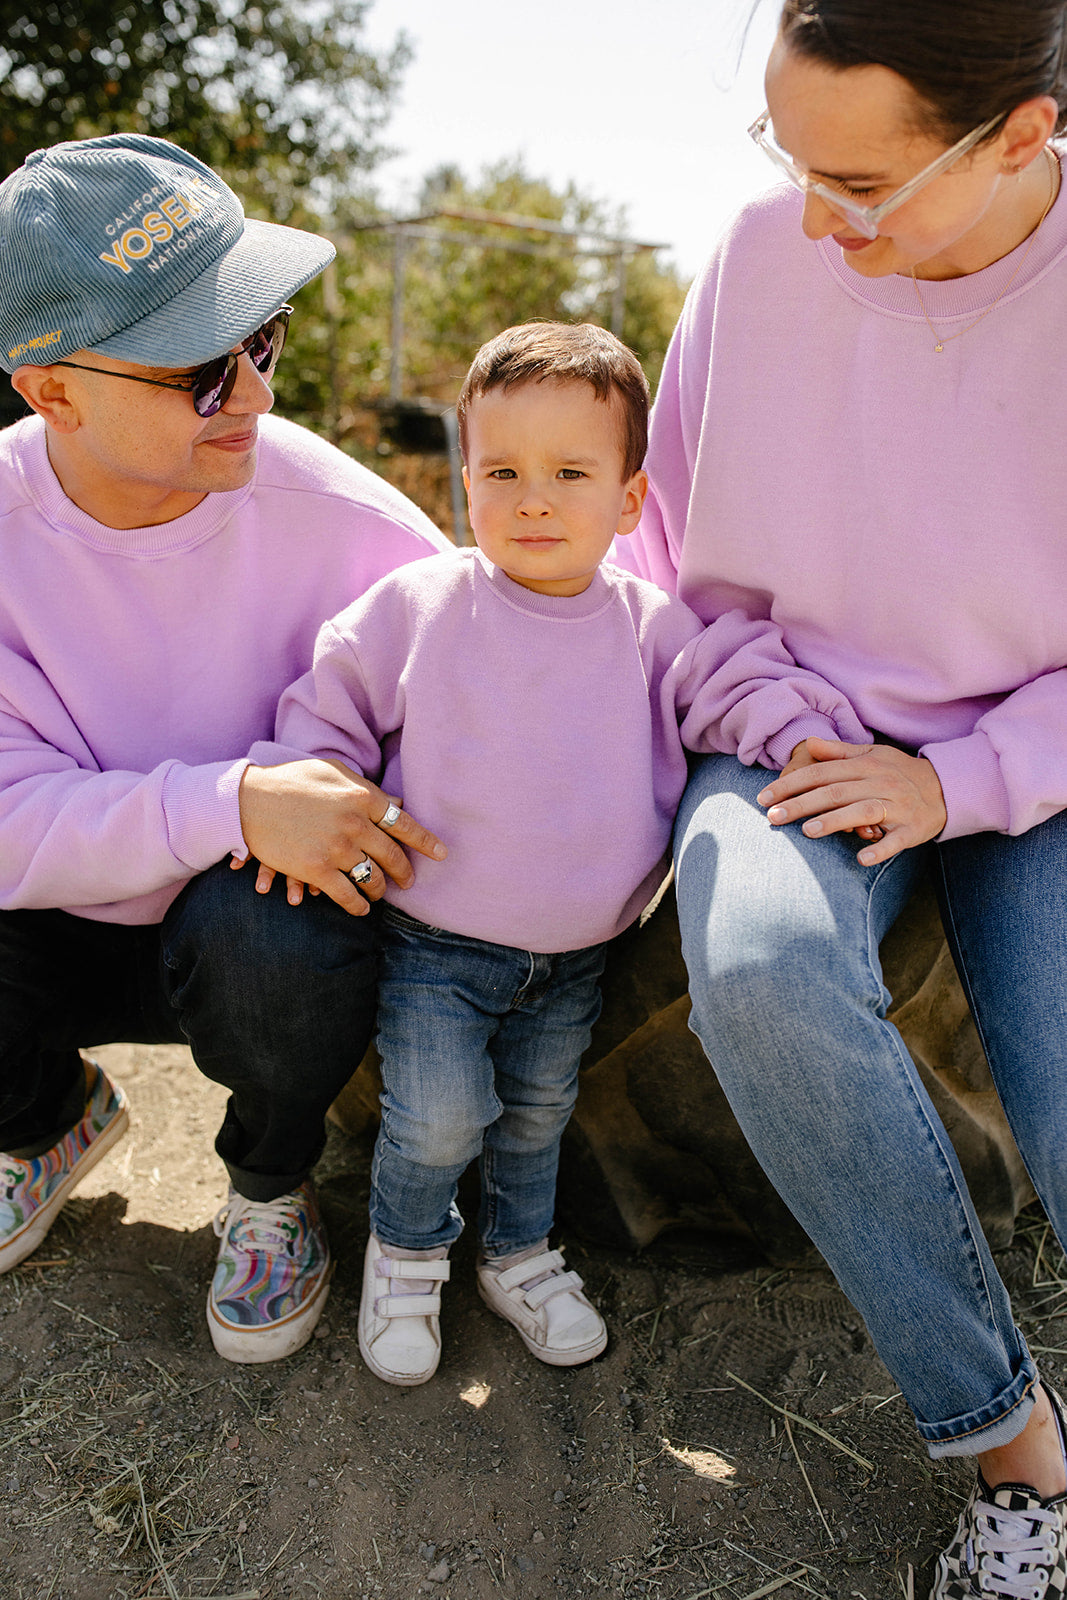 Mini-me mania: Why families are wearing matching clothes